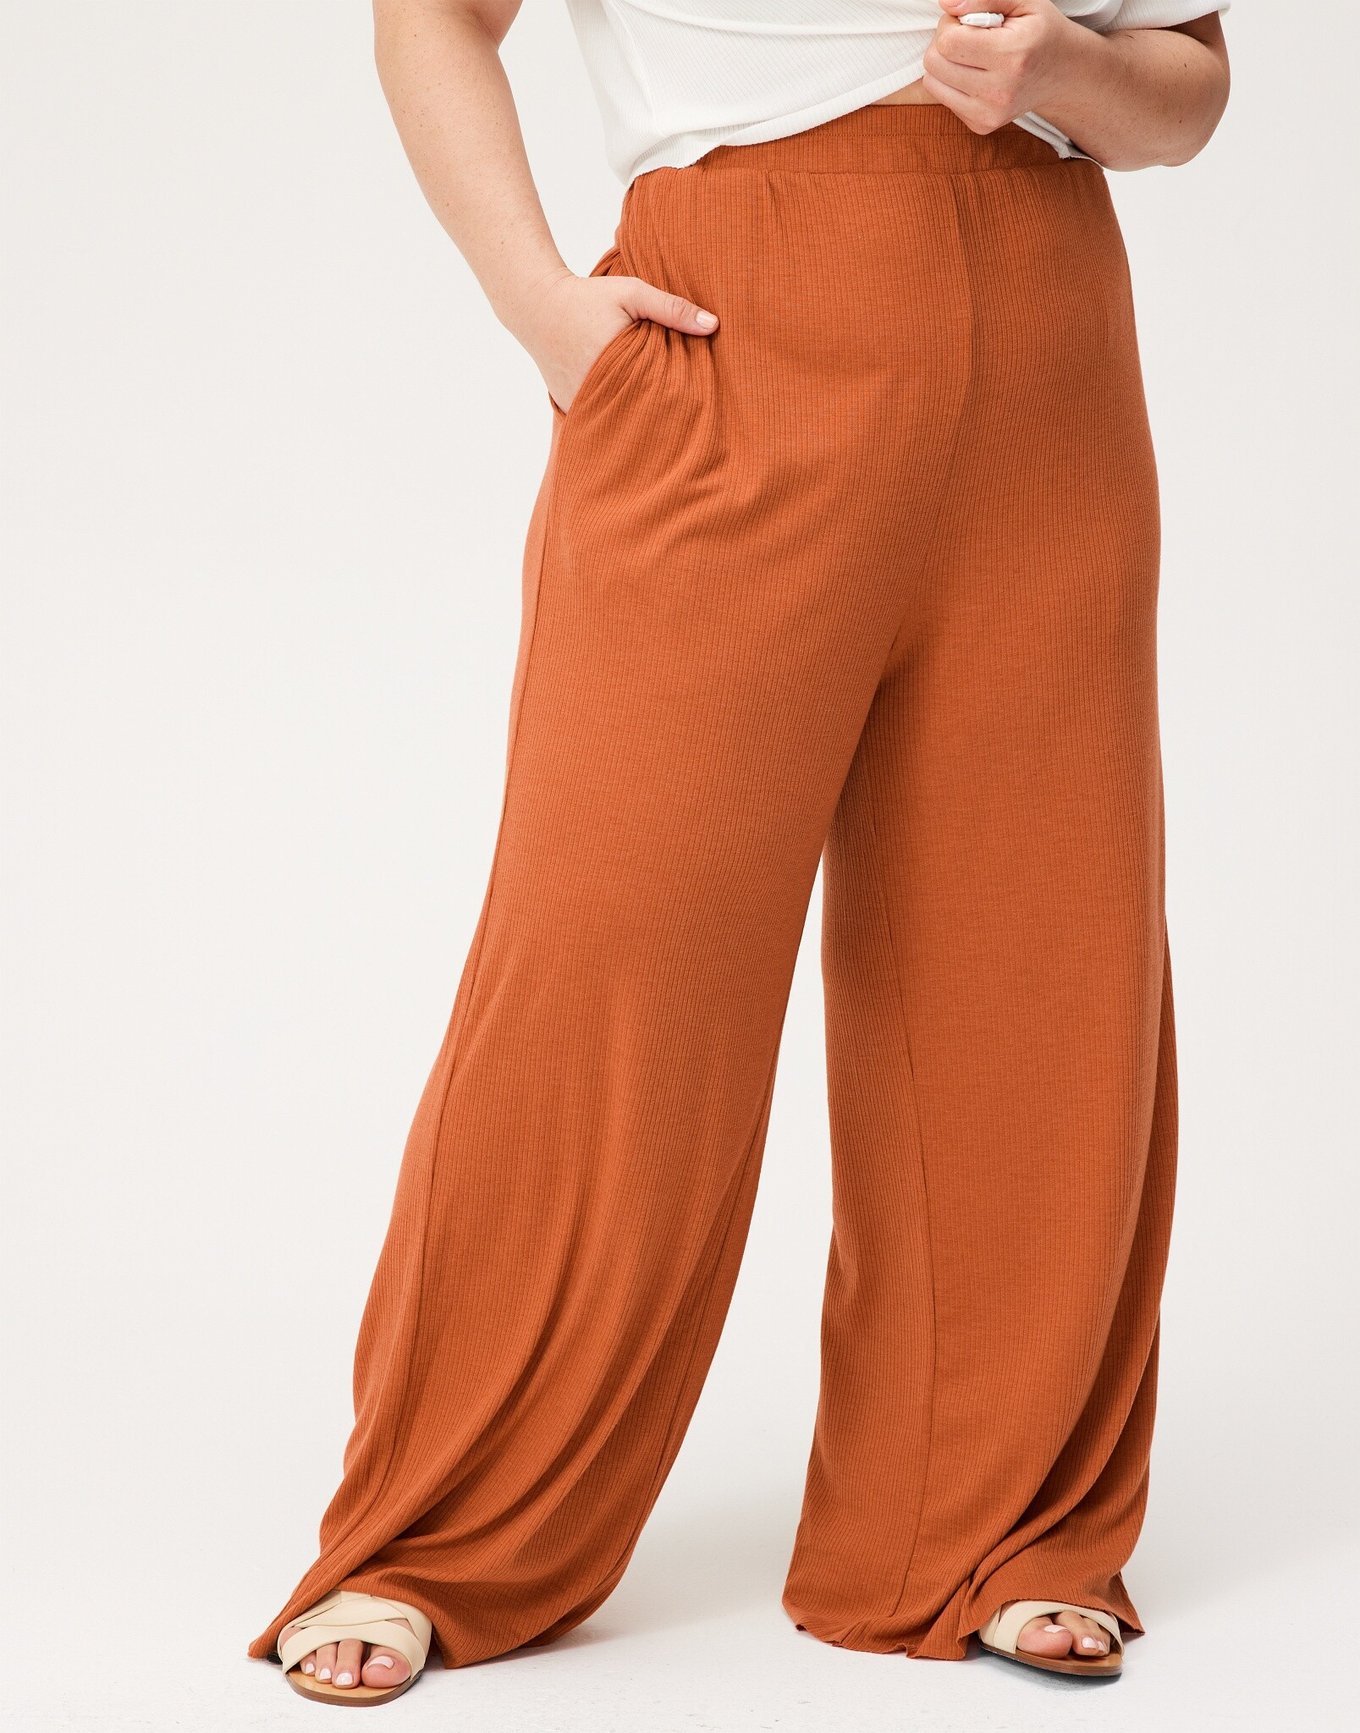 Buy Rust Orange Trousers & Pants for Women by Outryt Online | Ajio.com